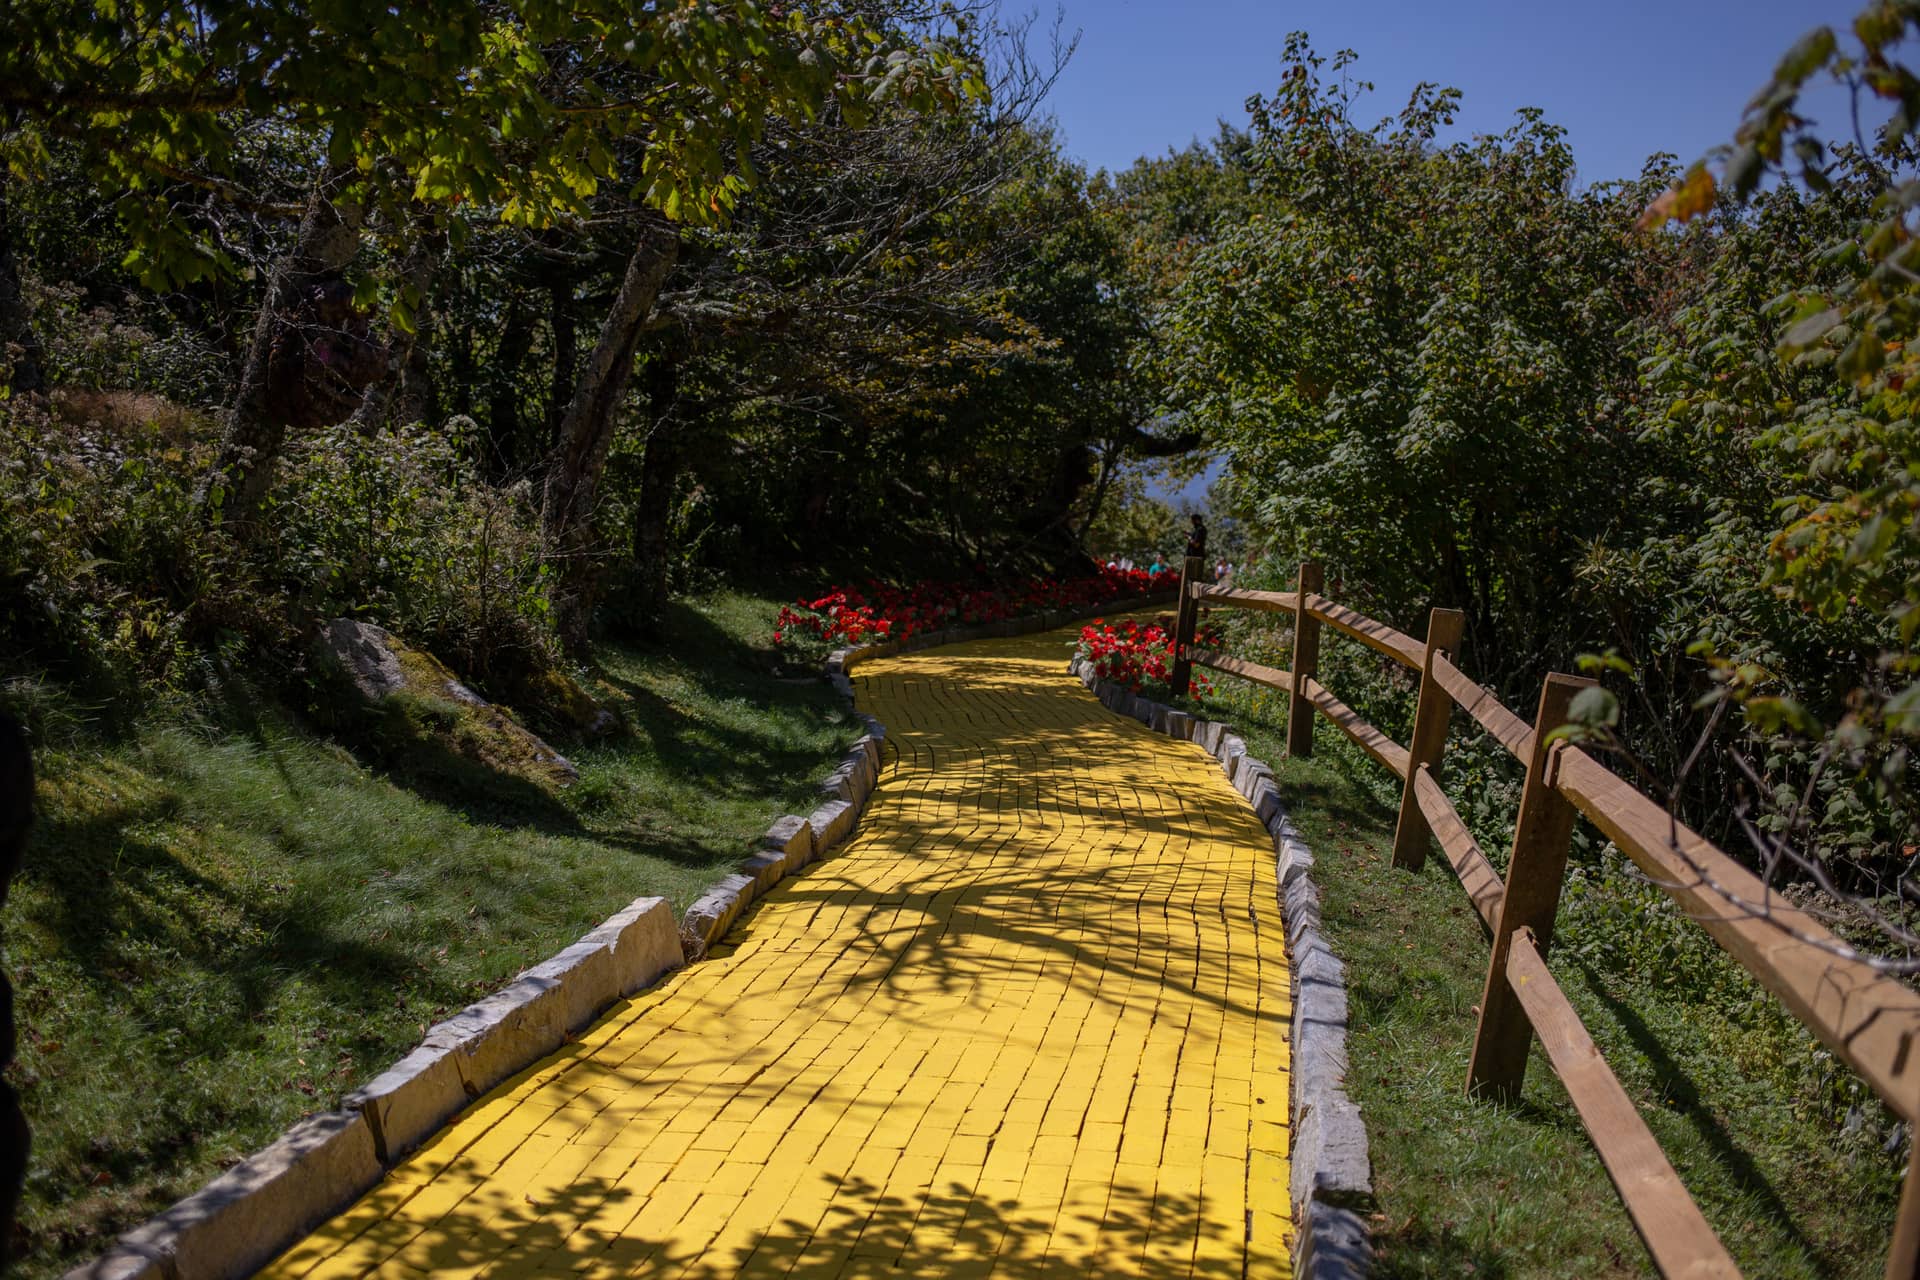 Follow the Yellow Brick Road to the Abandoned Land of Oz